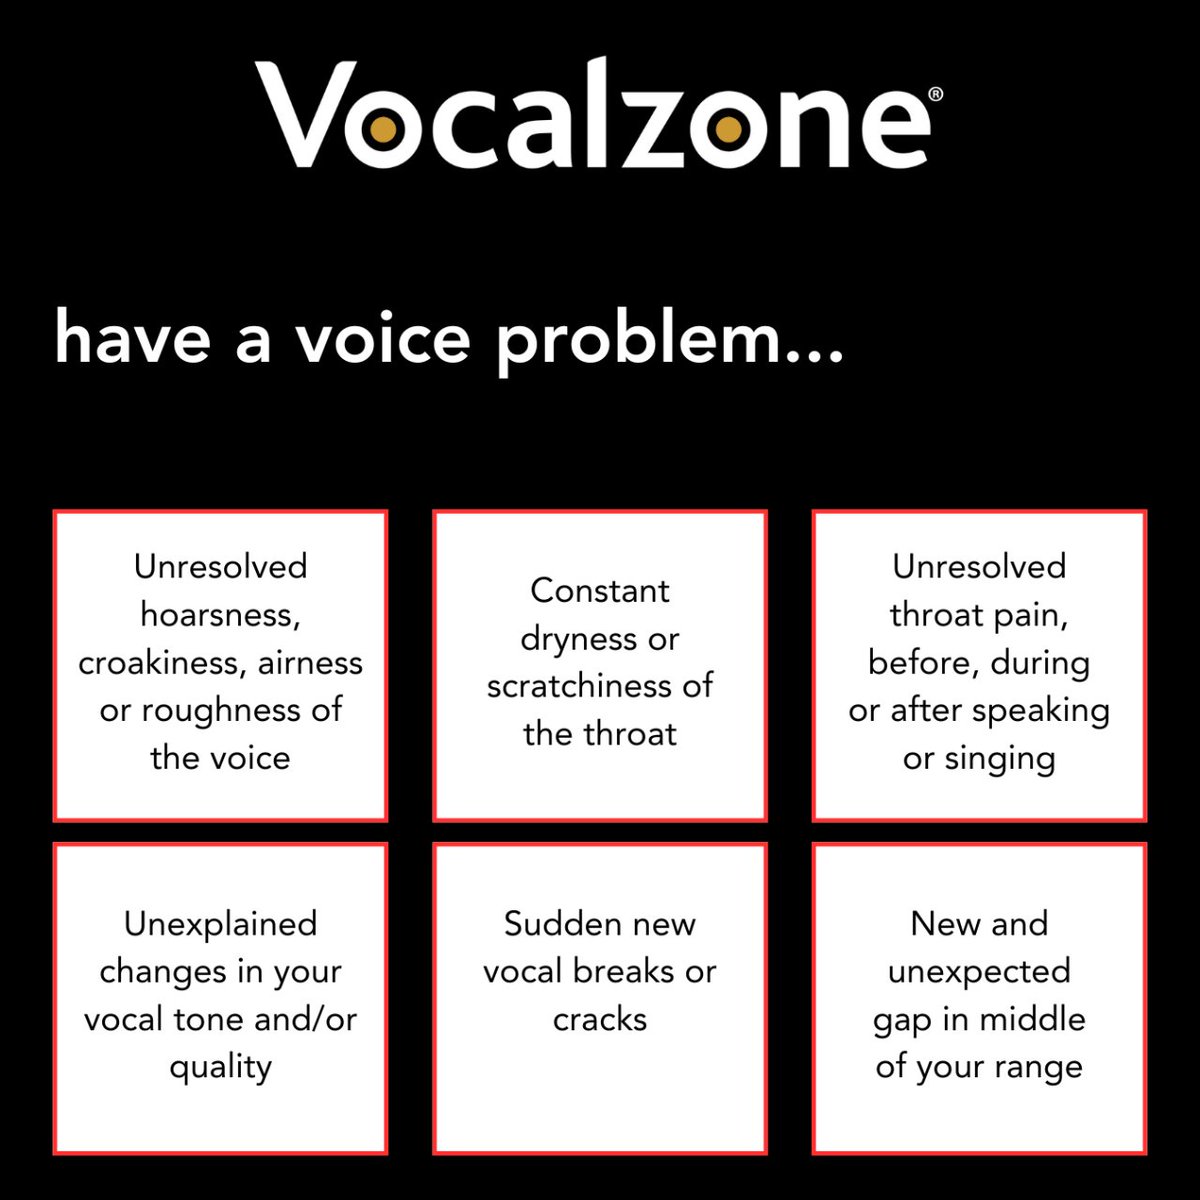 Have you had any of these voice problems? 🗣️‼️ #throatcare #vocalzone #vzfamily #vocalzonehq